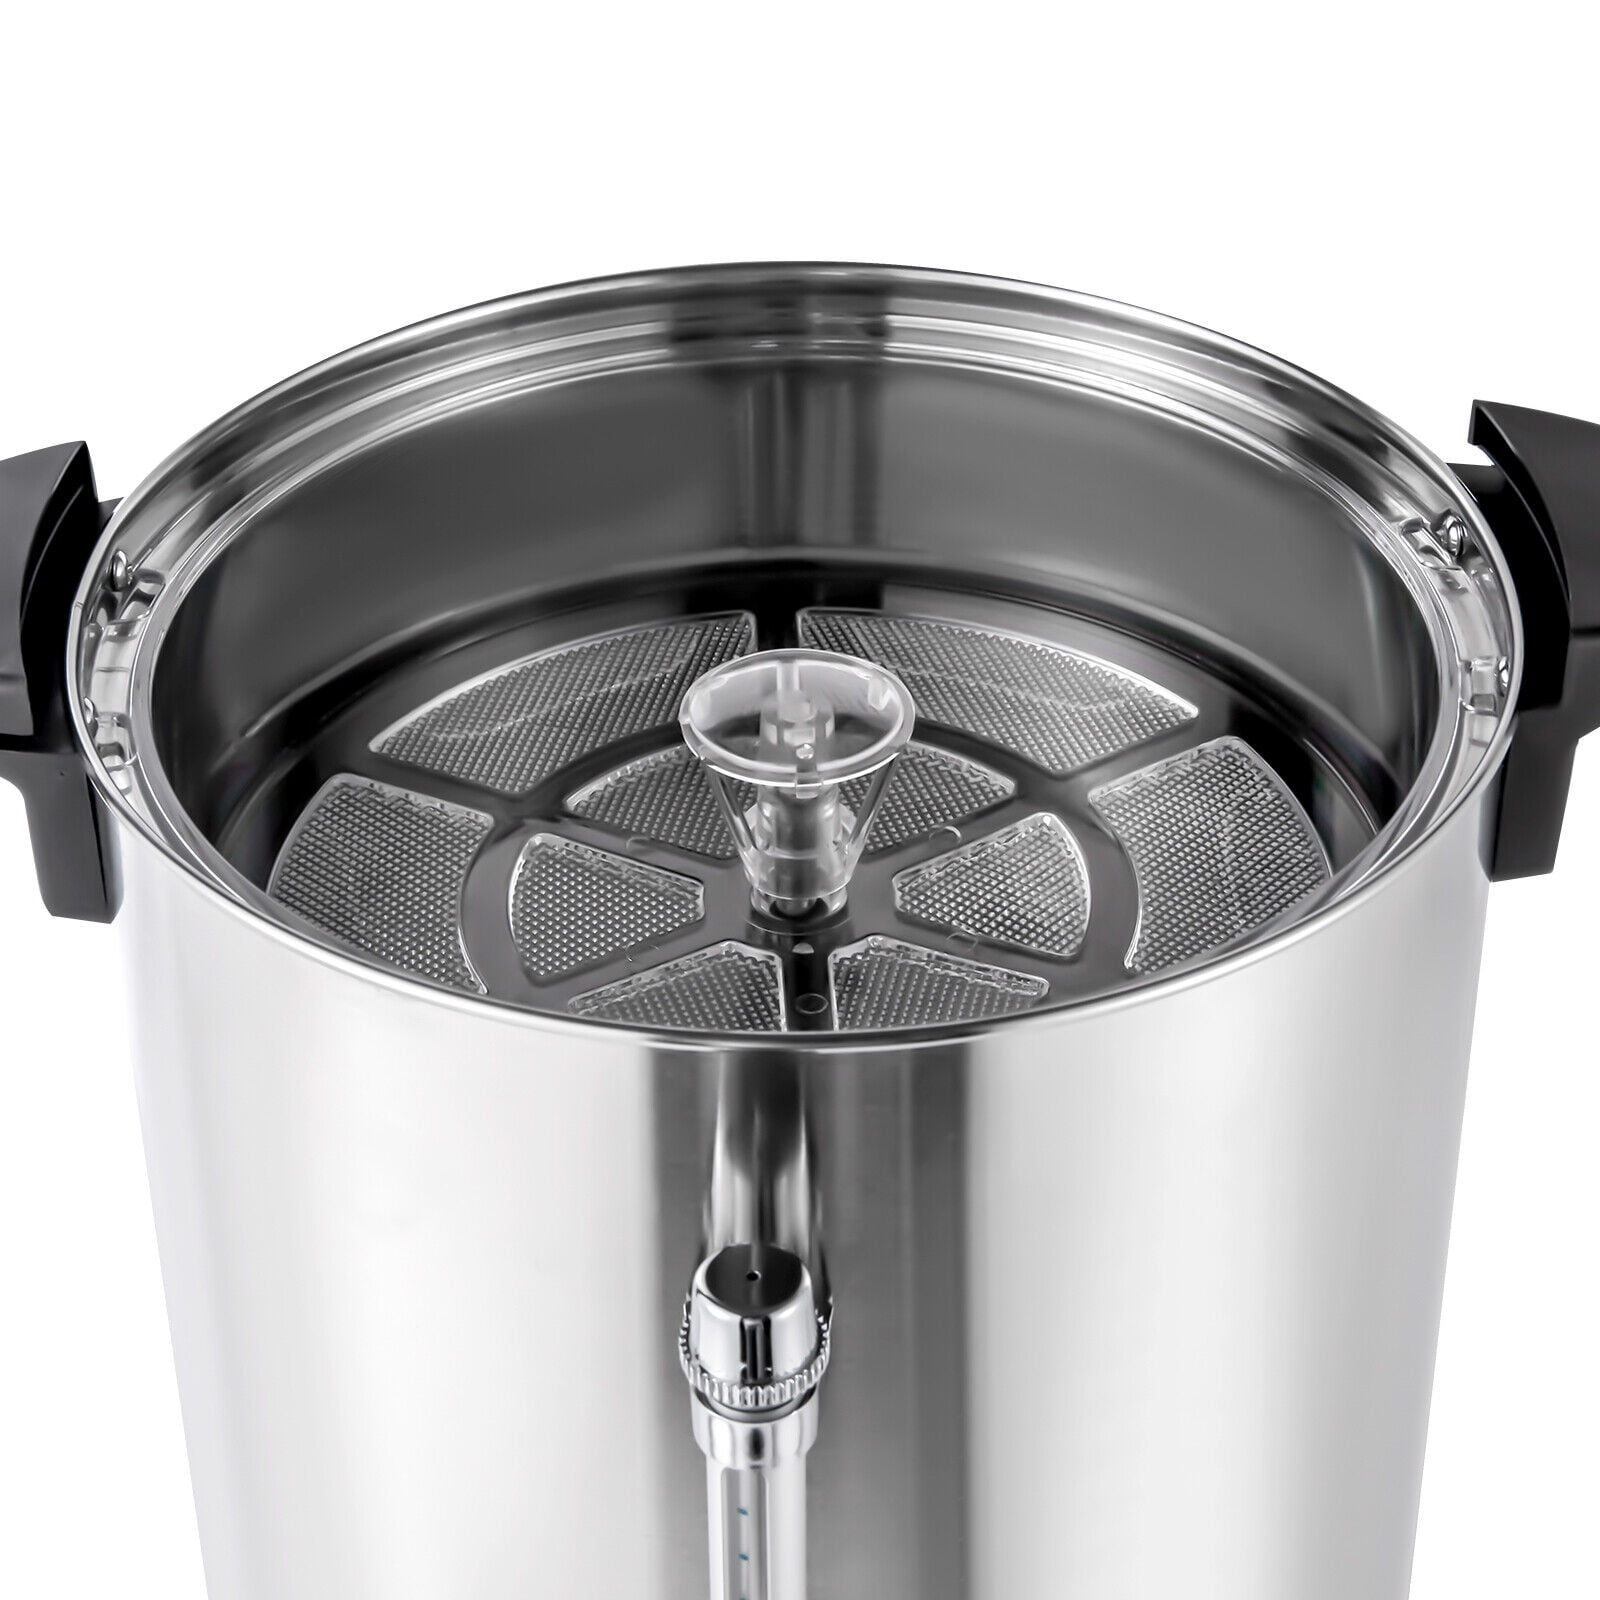 19 Litres Tea Urn, Stainless Steel